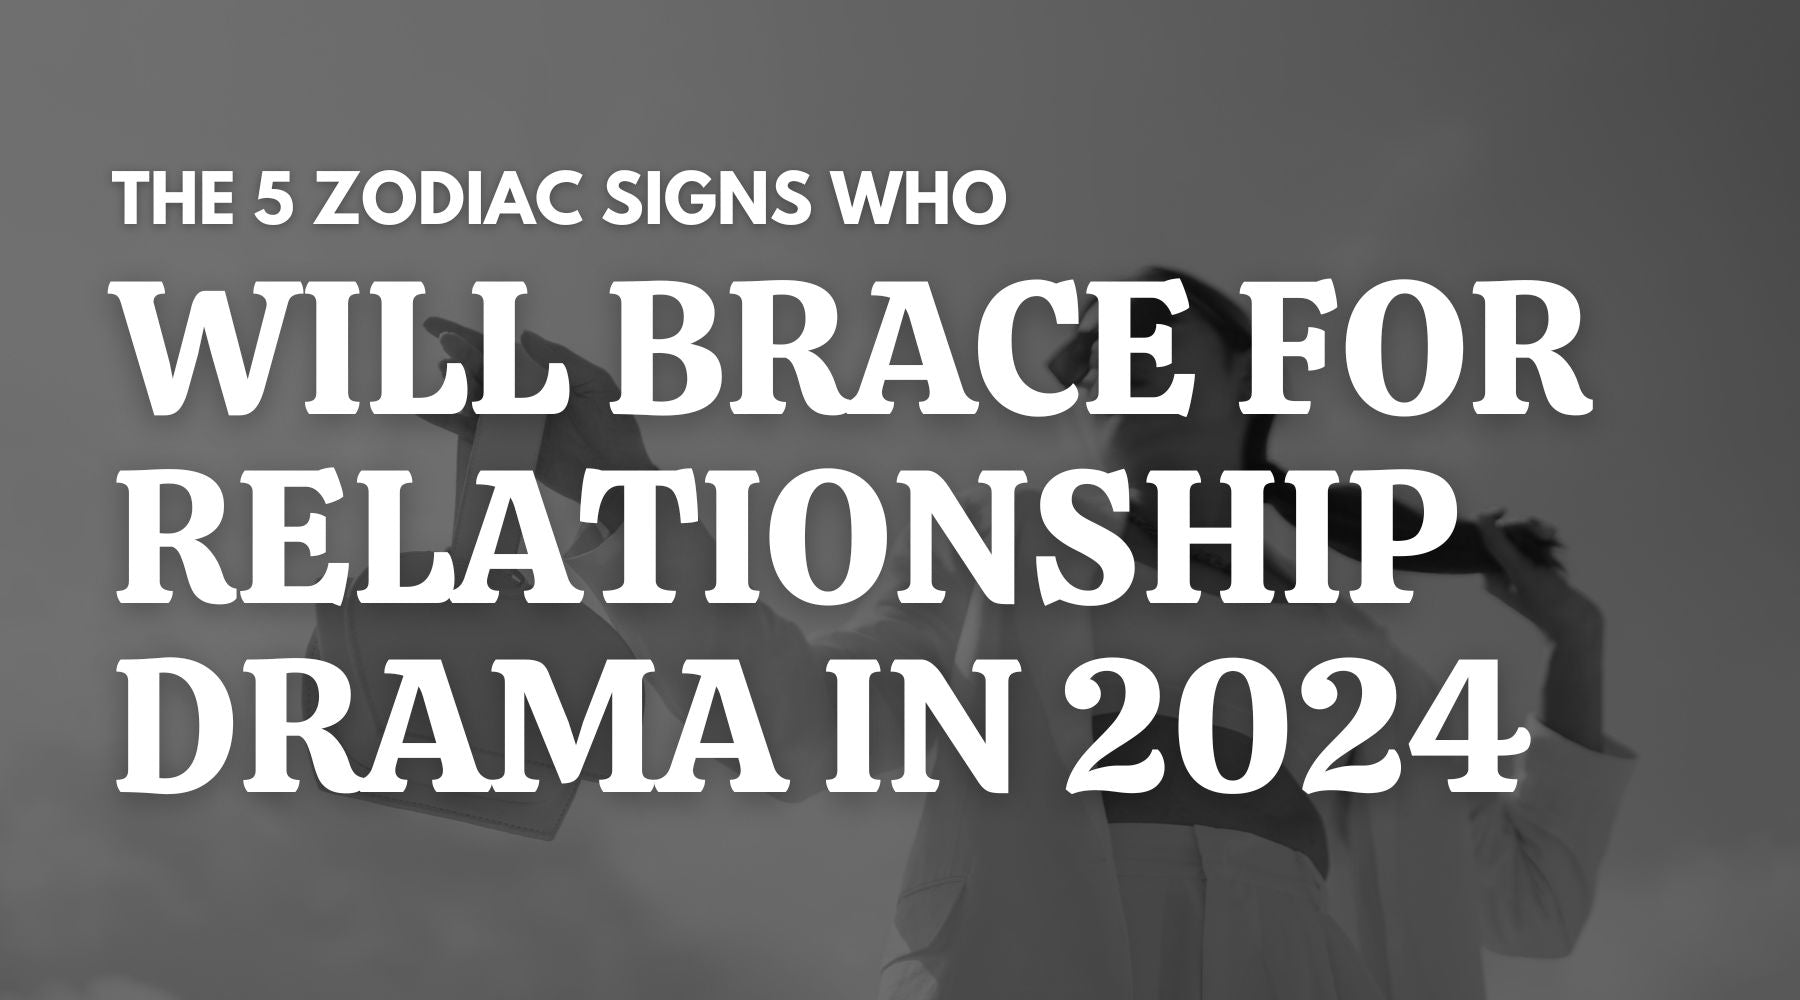 The 5 Zodiac Signs Bracing for Relationship Drama in 2024